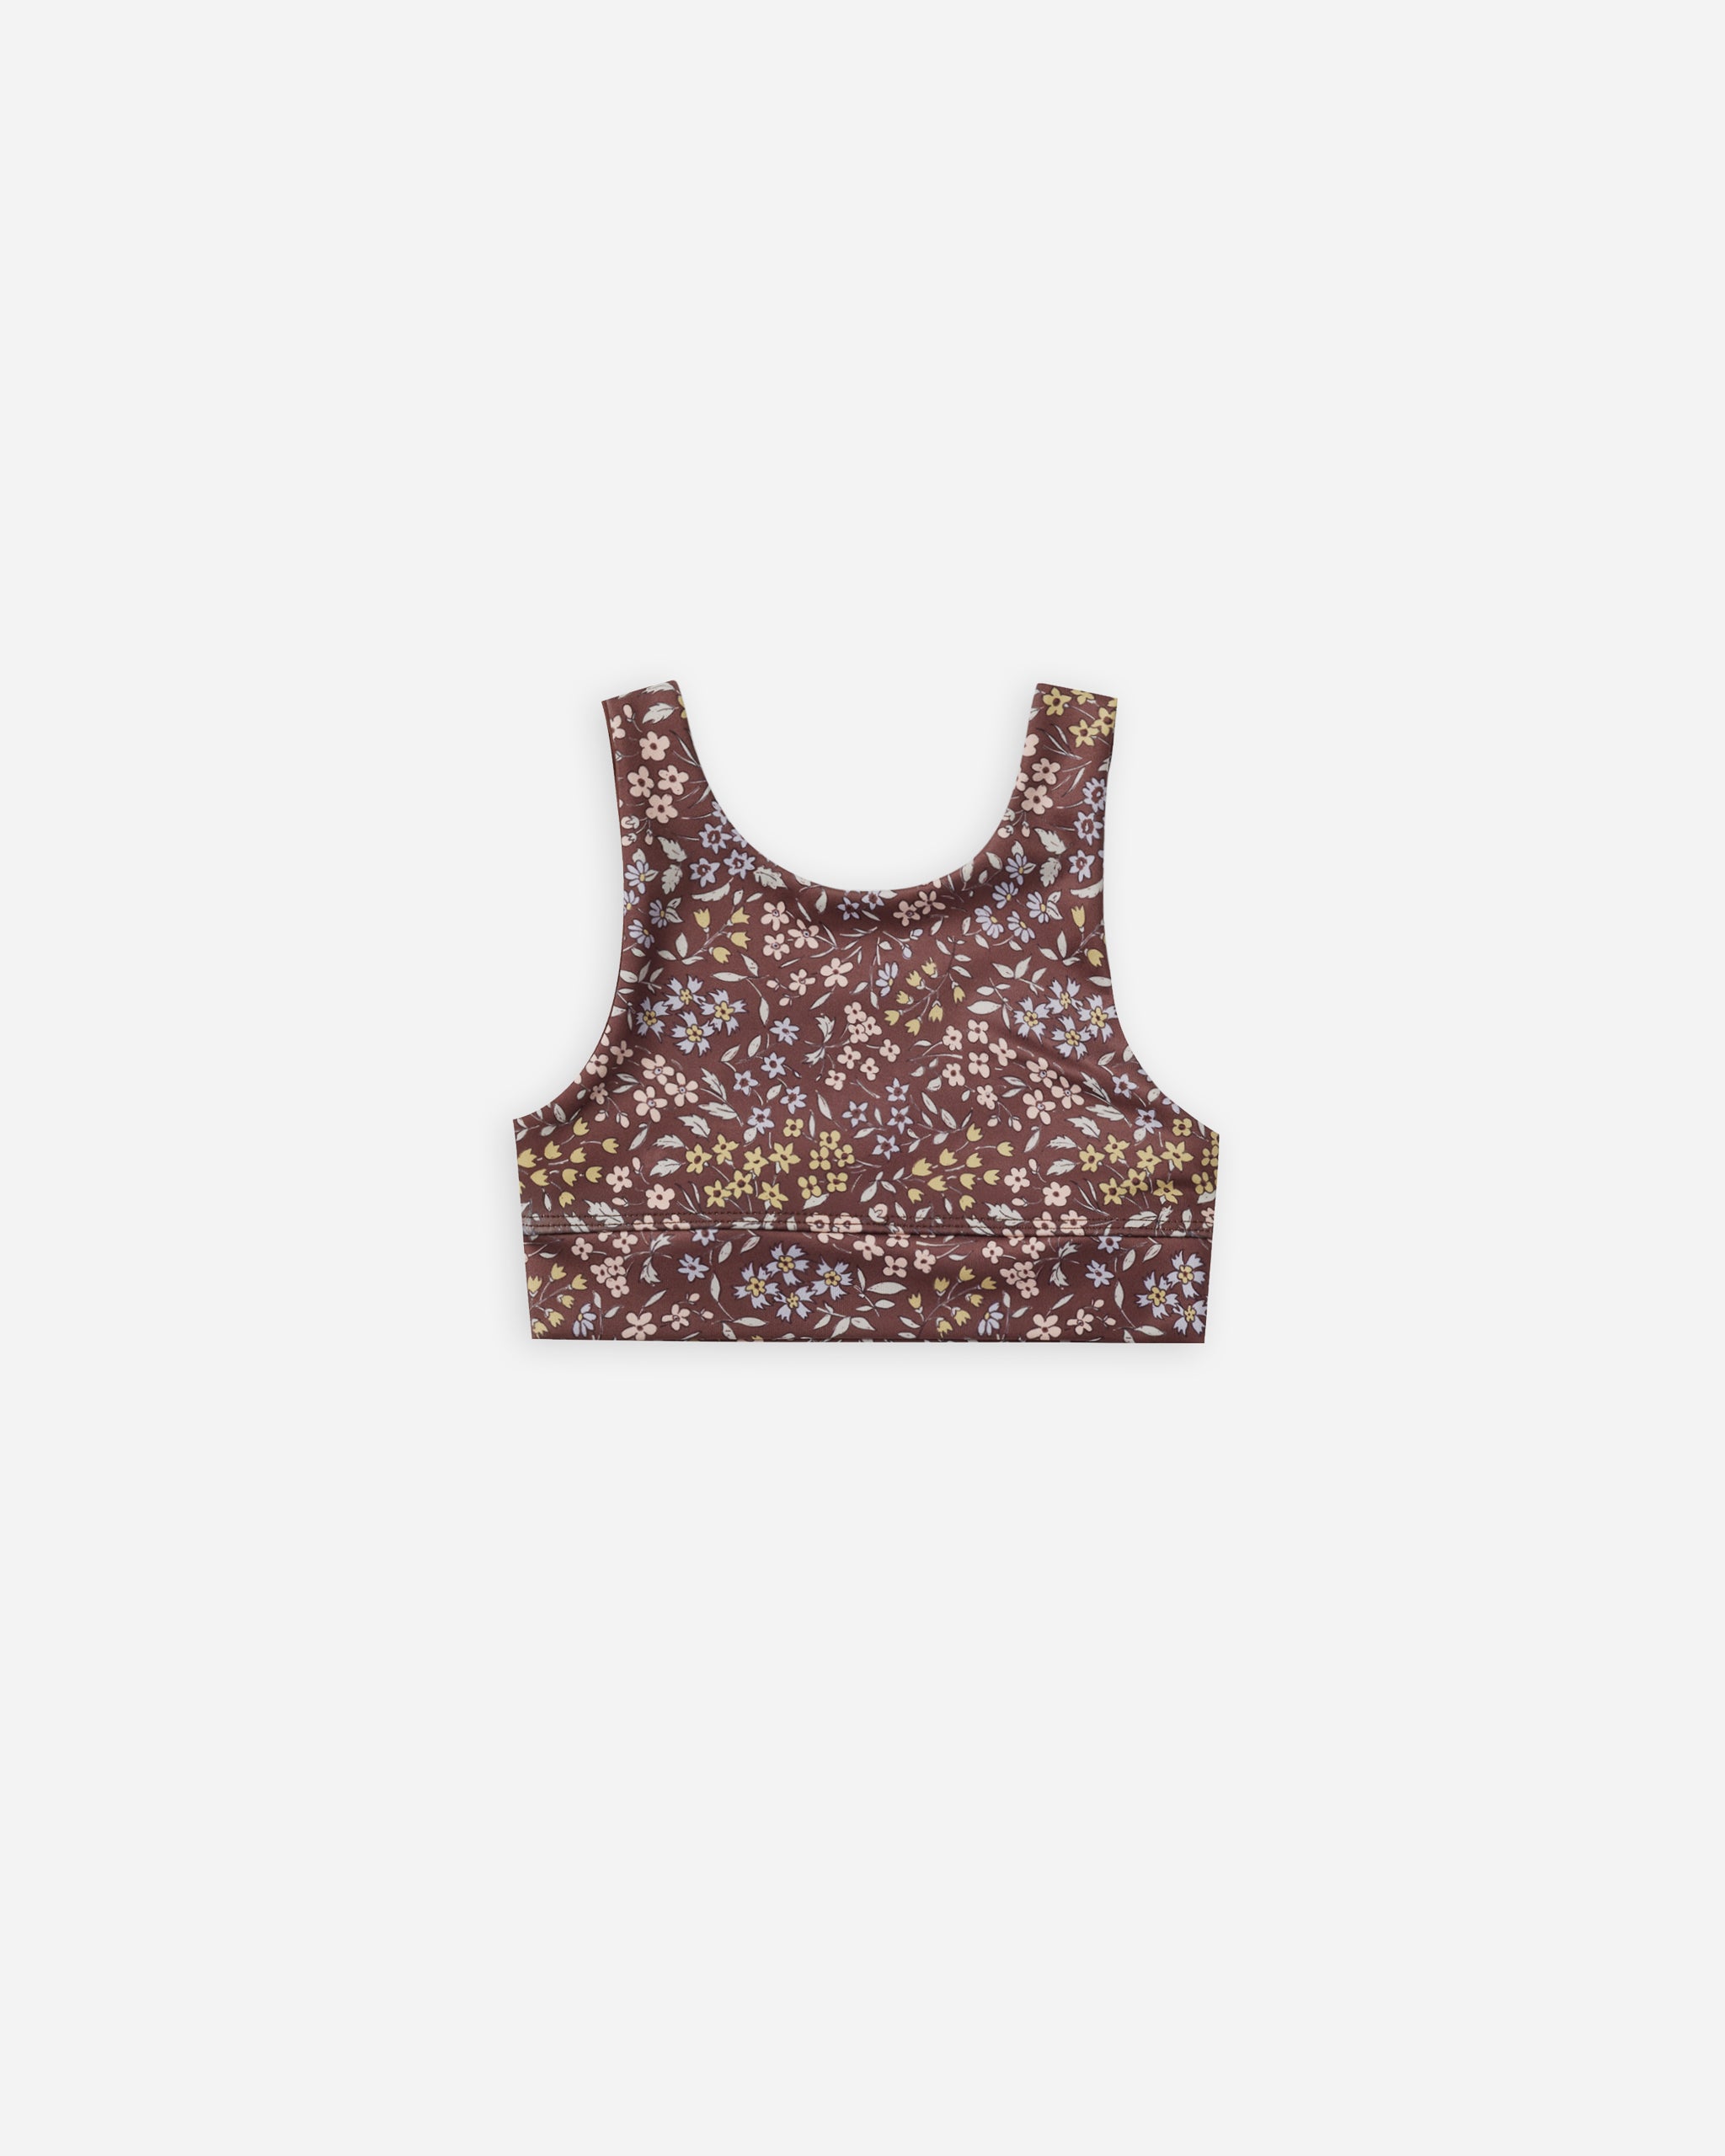 Swift Sports Bra | rustic Floral - Rylee + Cru | Kids Clothes | Trendy Baby Clothes | Modern Infant Outfits |